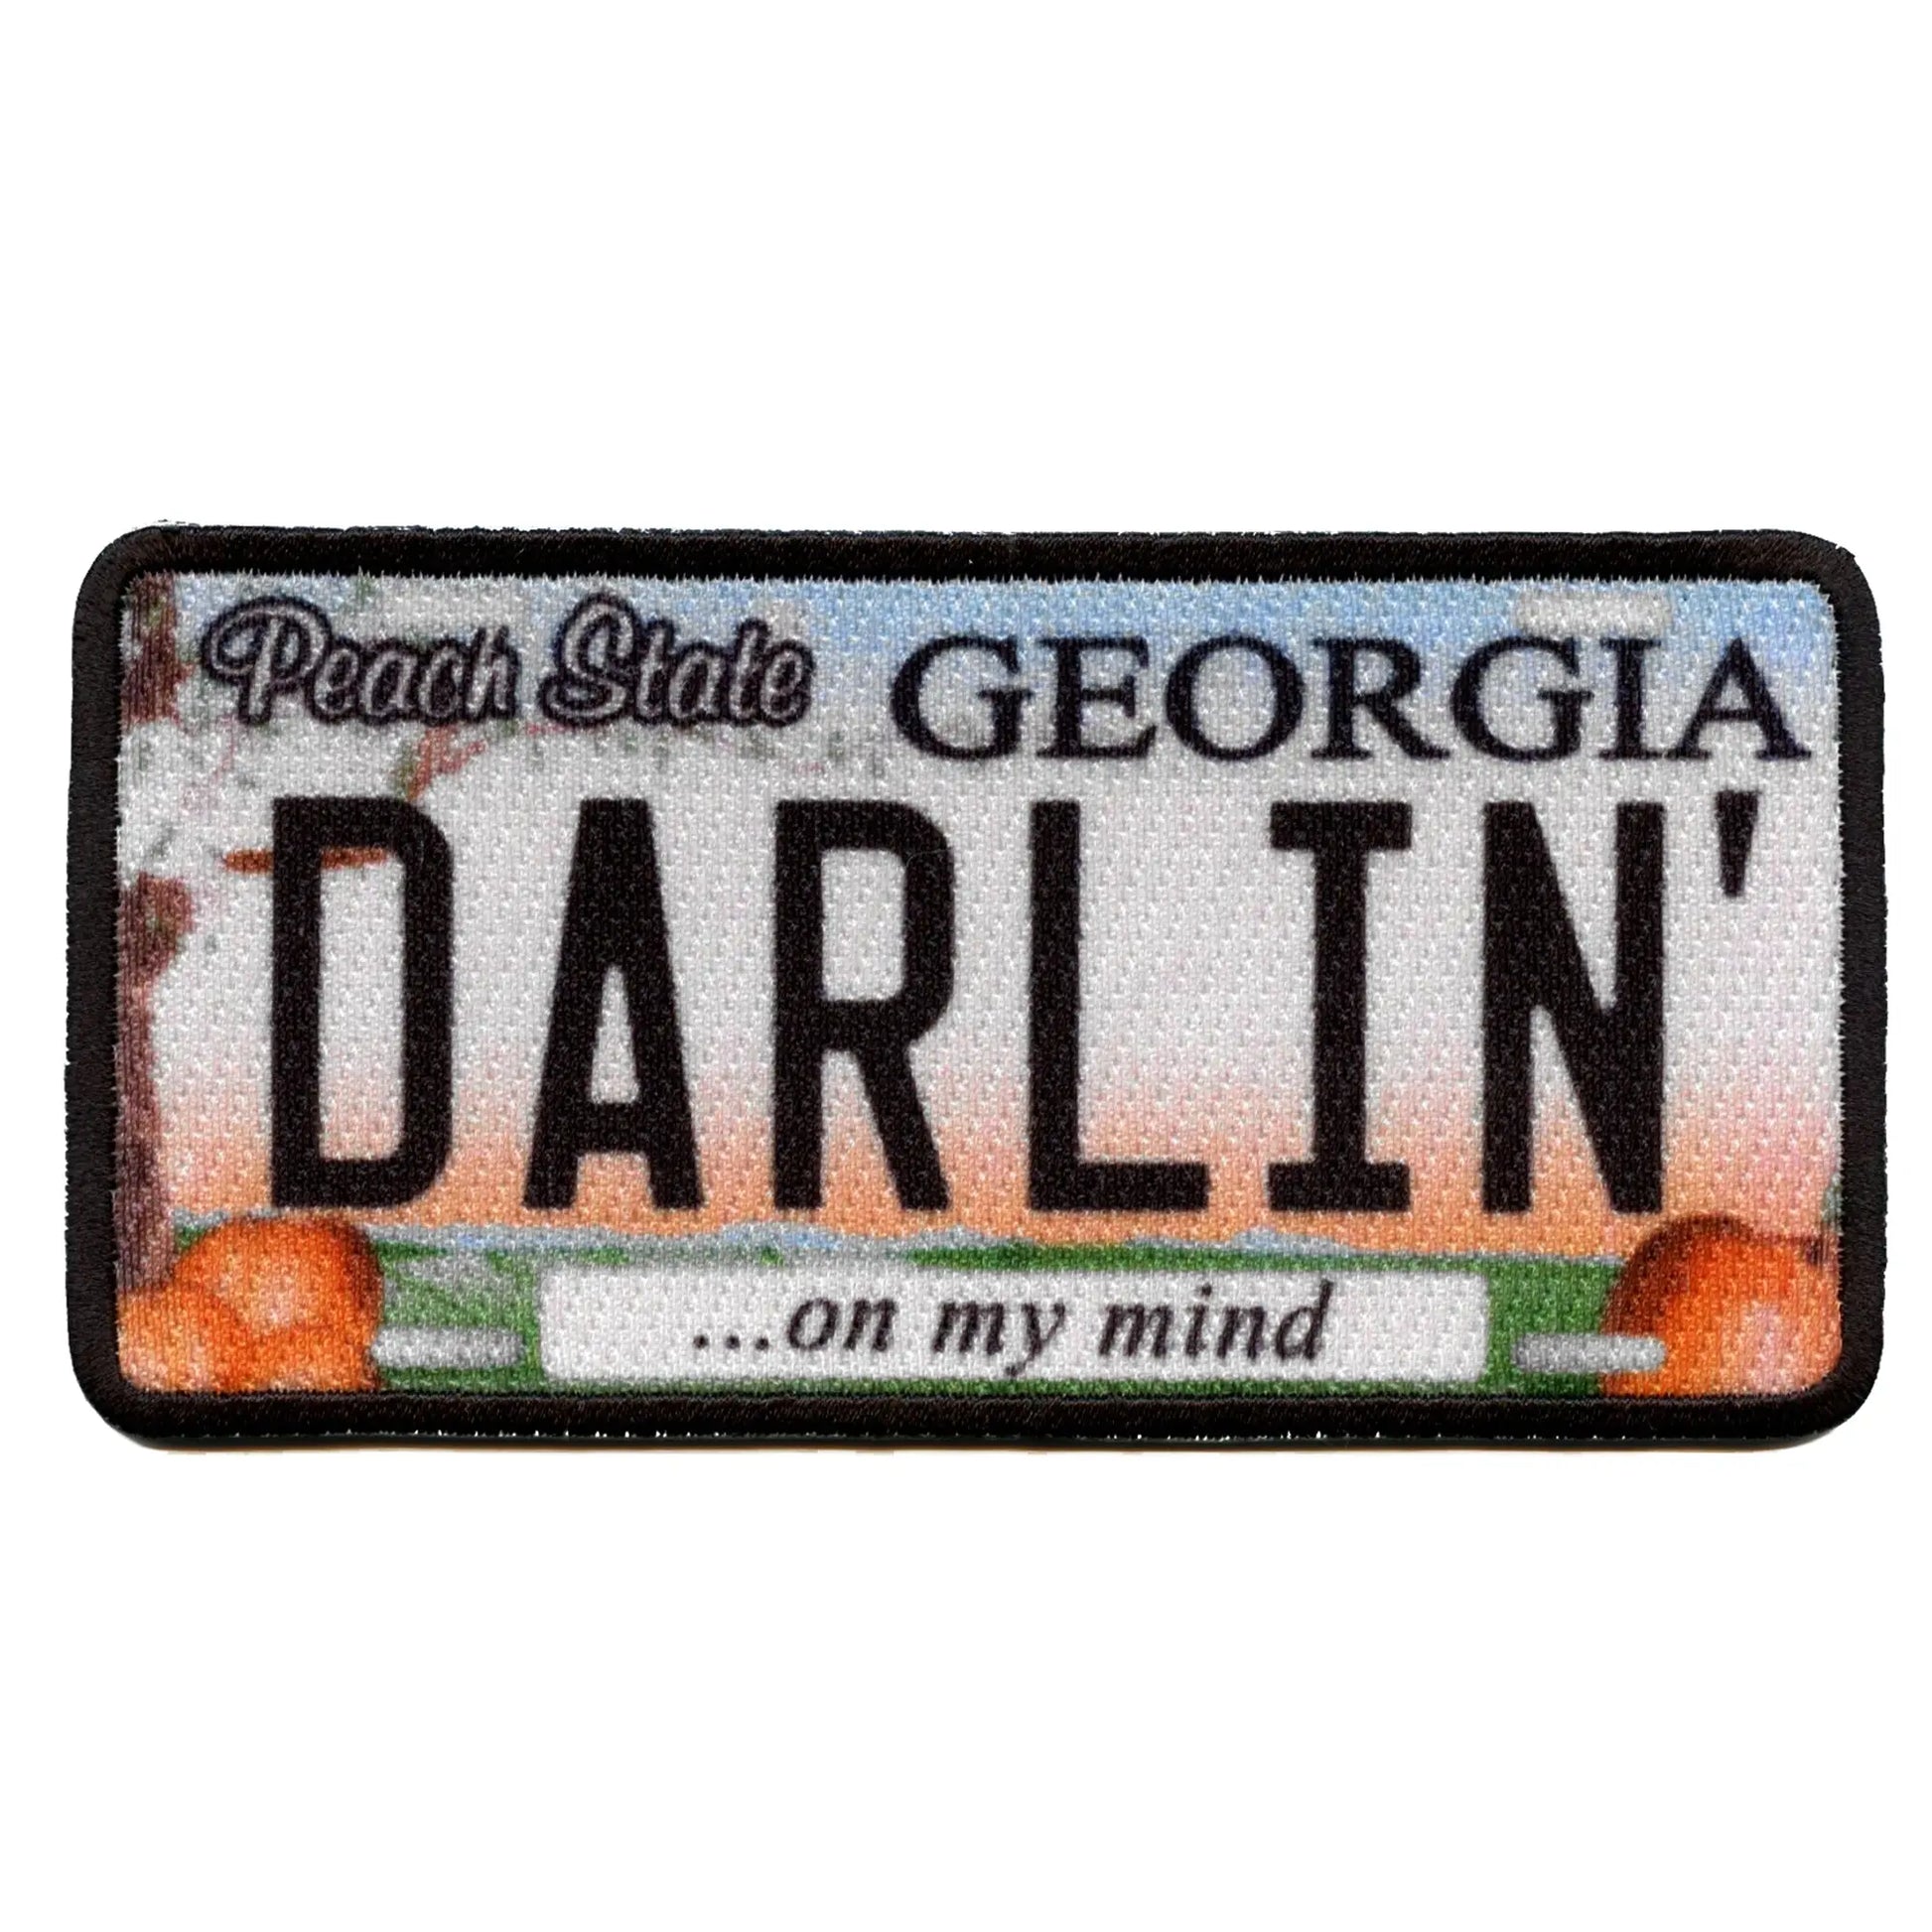 Georgia Darlin License Plate Patch Peach State Embroidered Iron On 